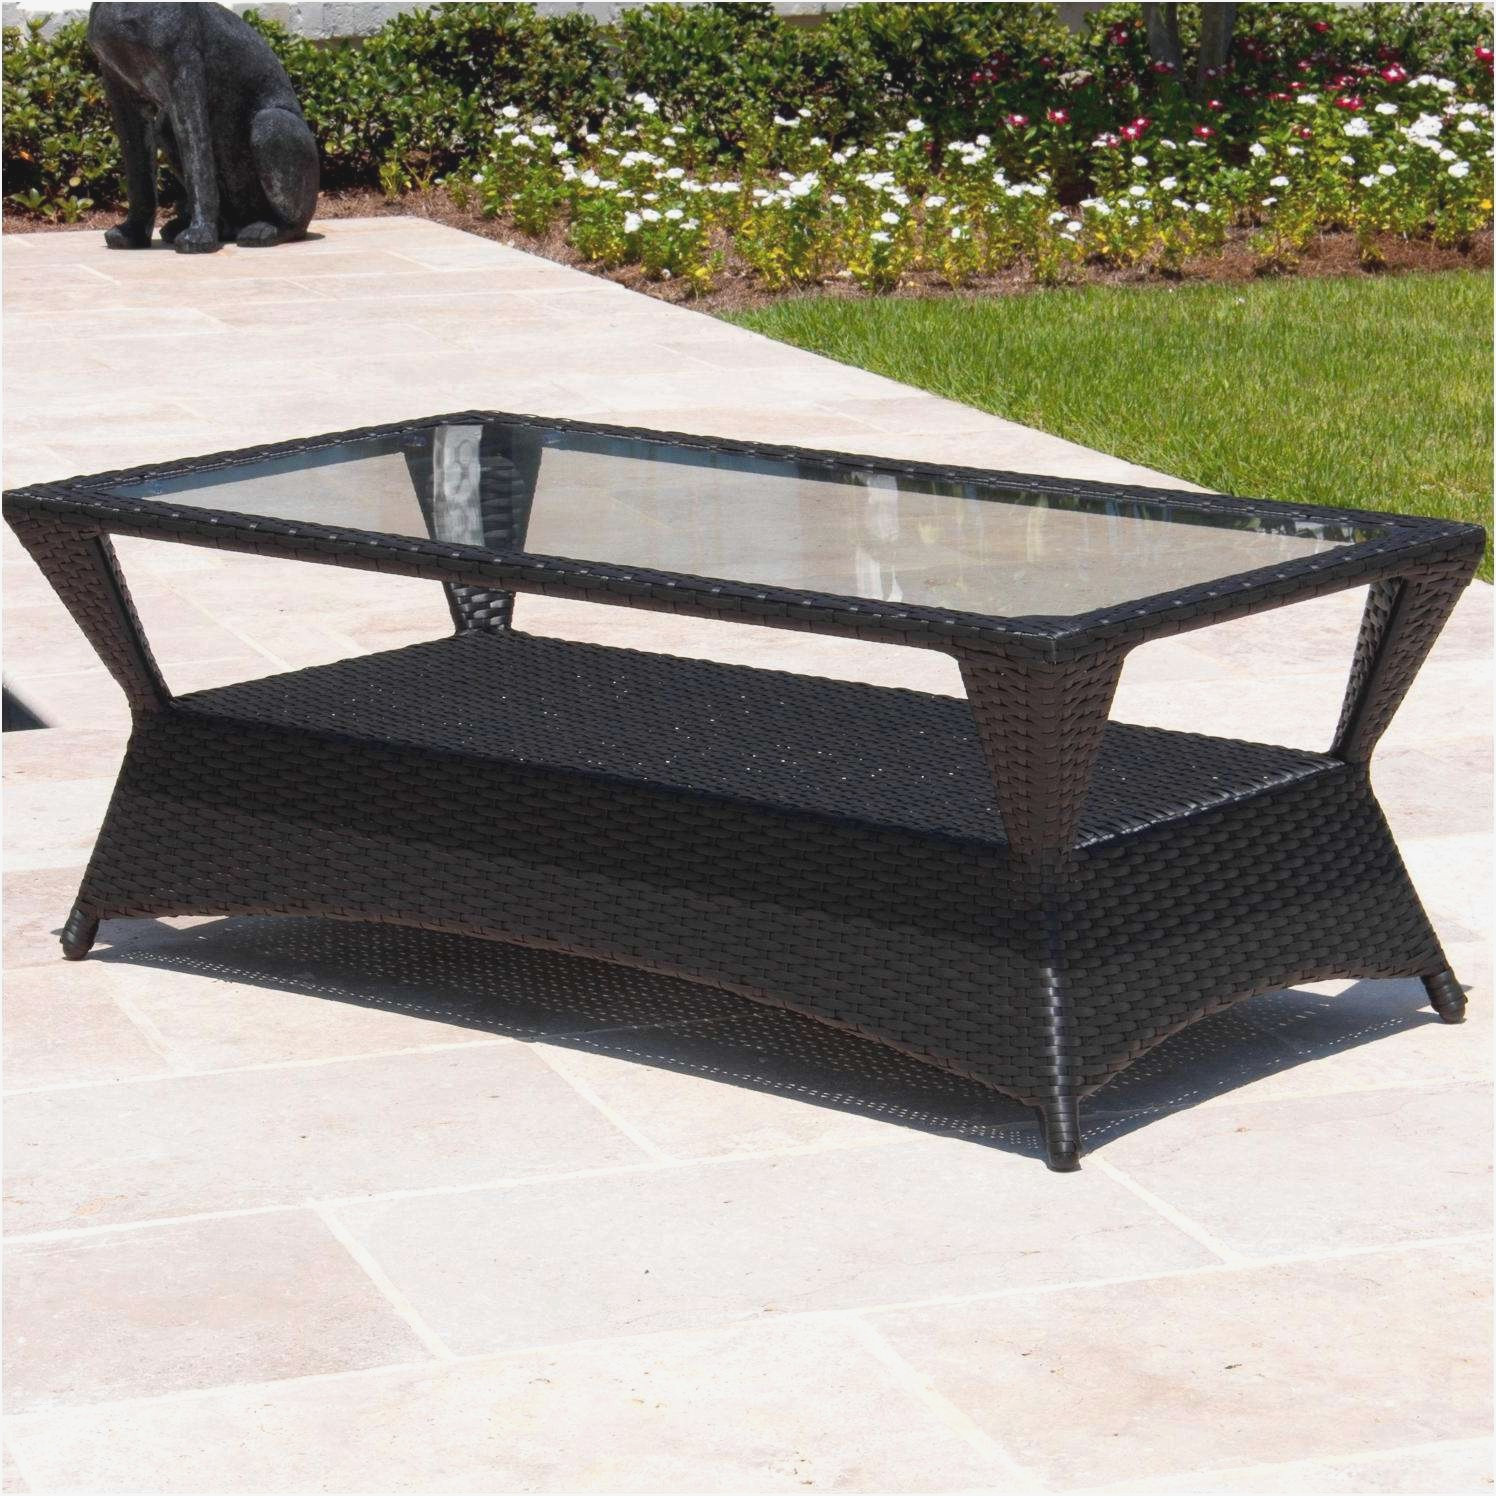 home depot outdoor vases of 15 home depot outdoor coffee table collections coffee tables ideas pertaining to home depot outdoor coffee table collection home depot coffee table fresh small porch furniture ideas